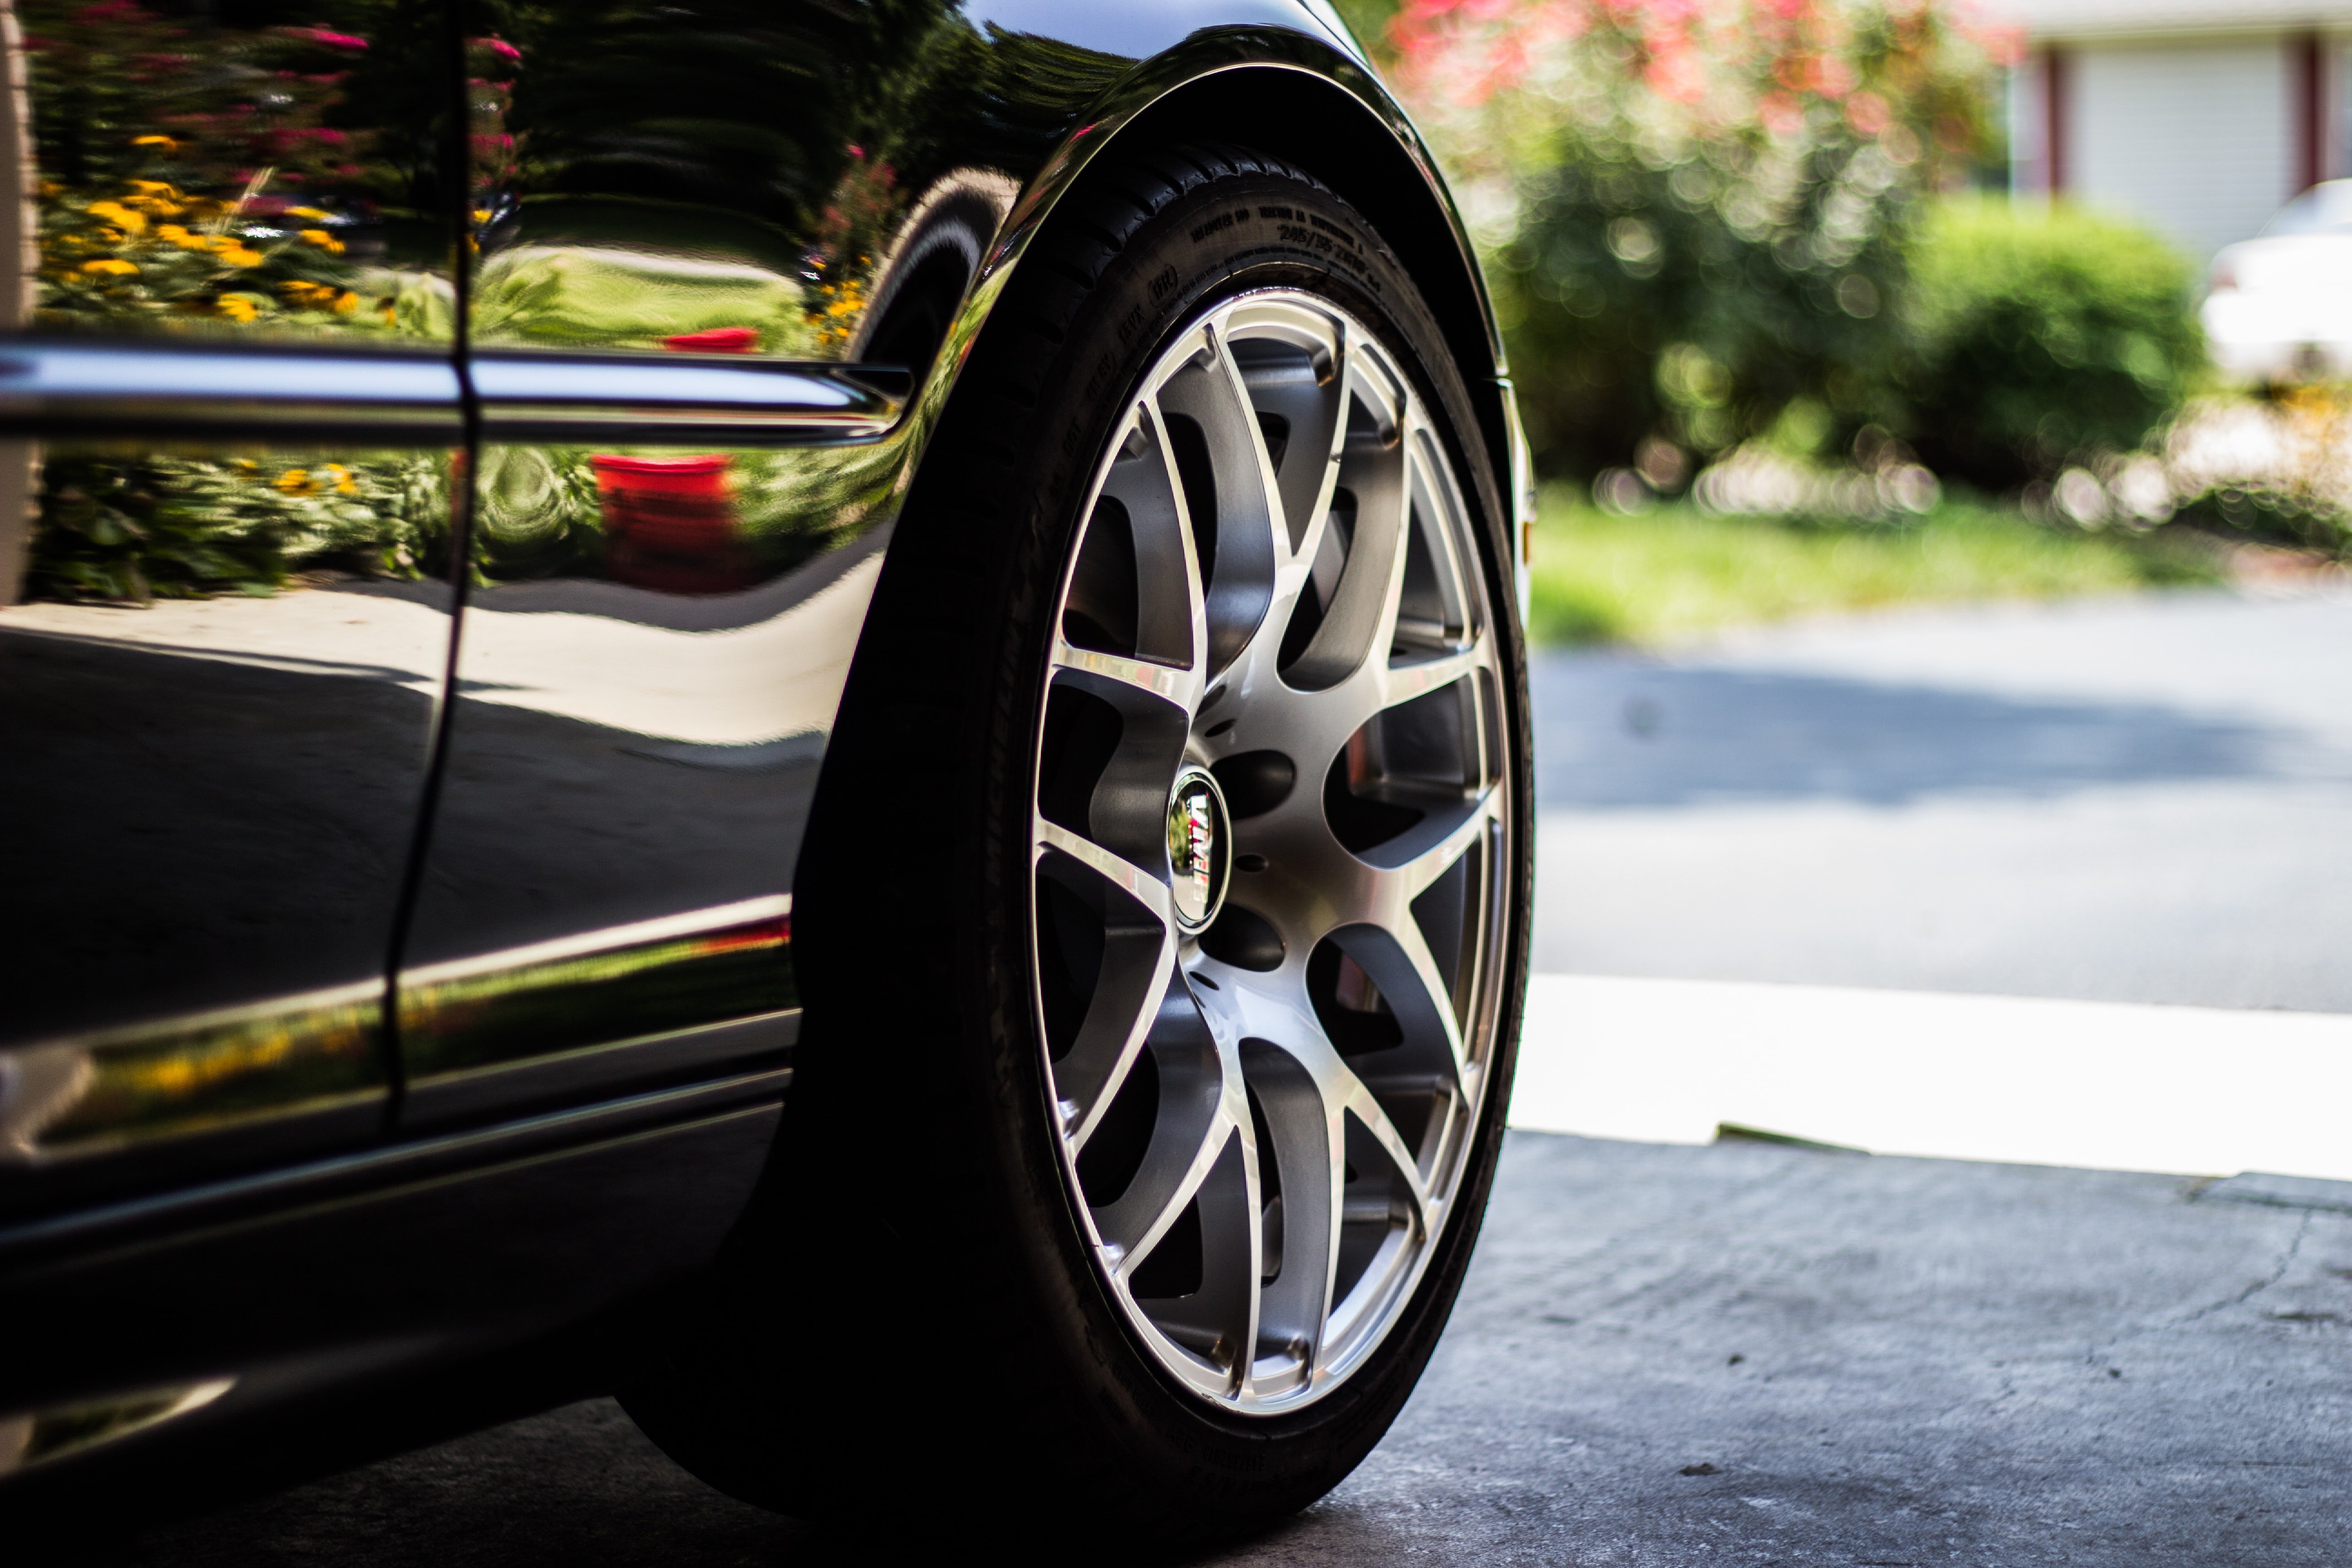 Picture of a car wheel | Source: Unsplash